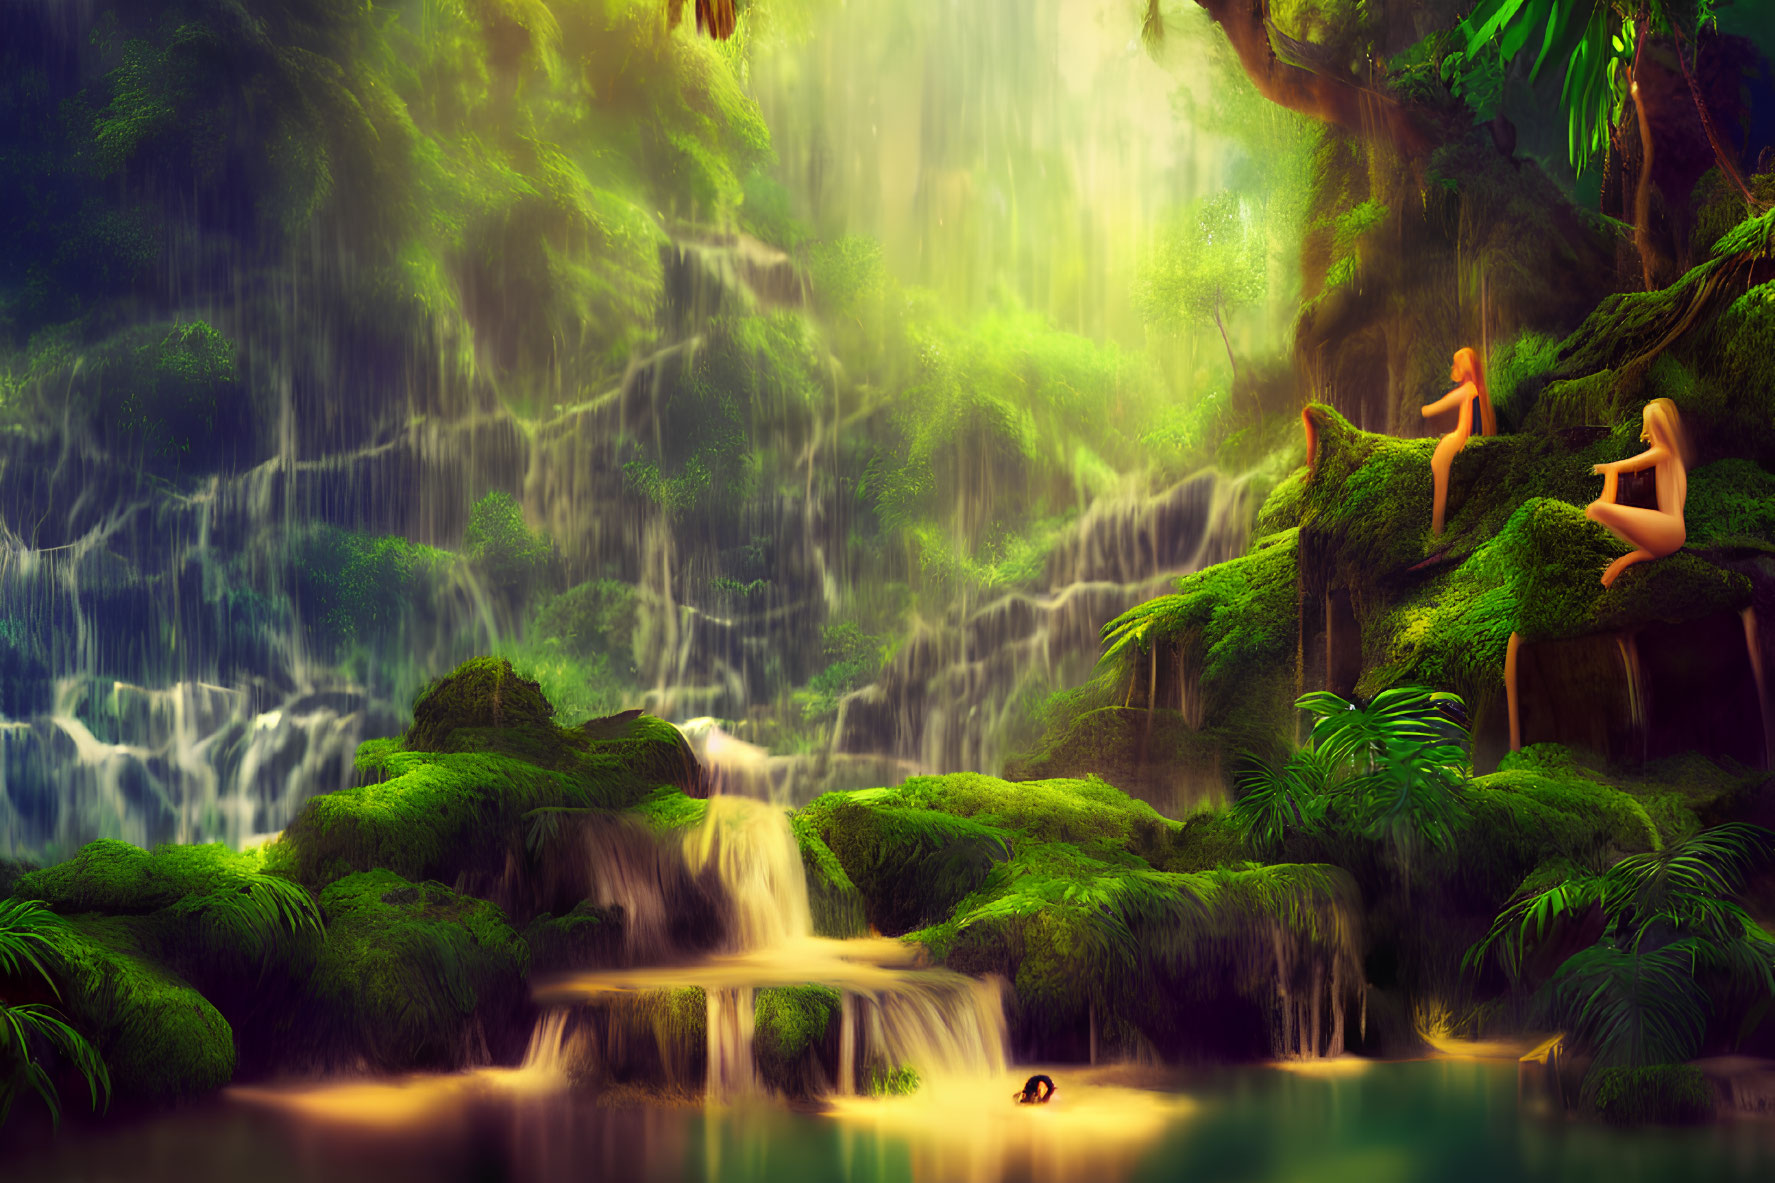 Tranquil jungle waterfall with lush greenery and two people in sunlight